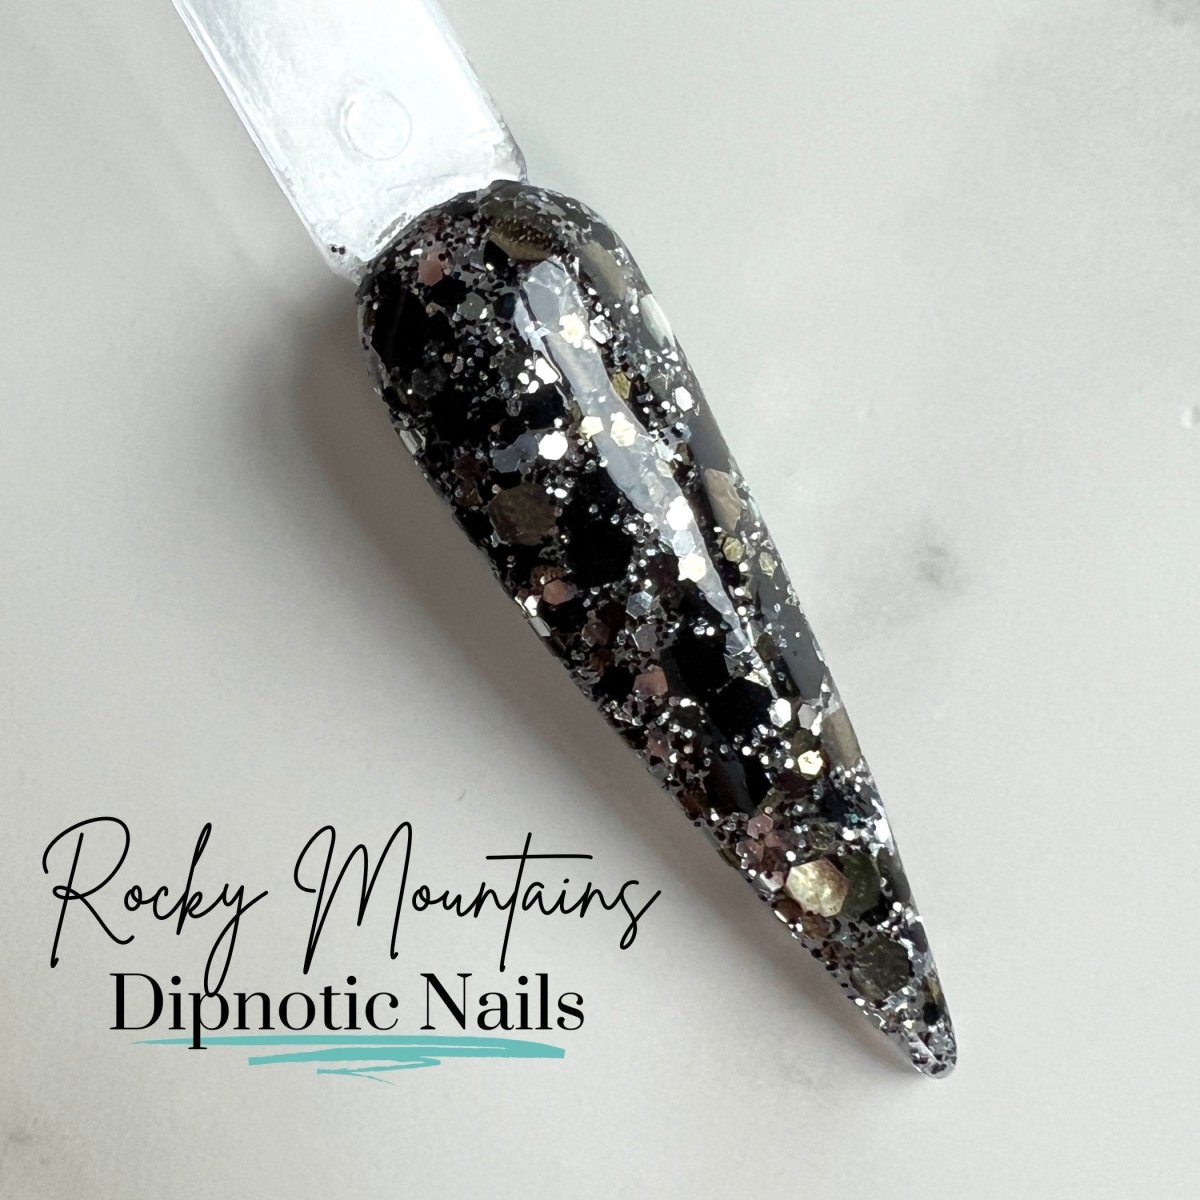 Photo shows swatch of Dipnotic Nails Rocky Mountains Black, Silver, and Gold Glitter Dip Powder The Colorado Winter Collection